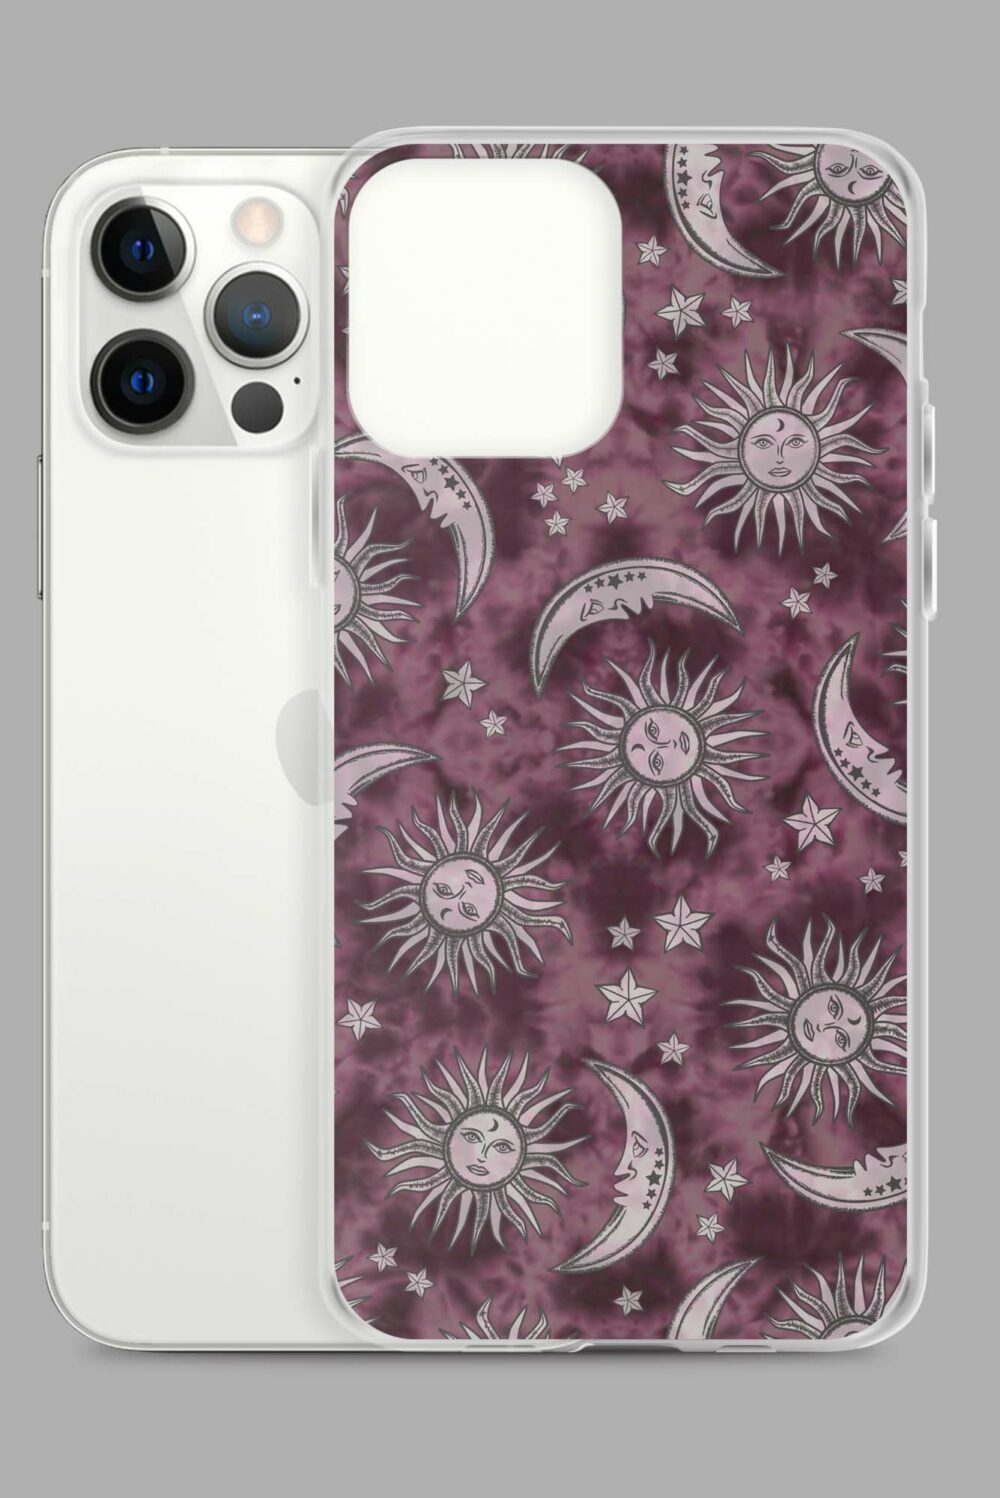 pink suns moons clear case for iphone iphone 12 pro max case with phone 64e26619499e9